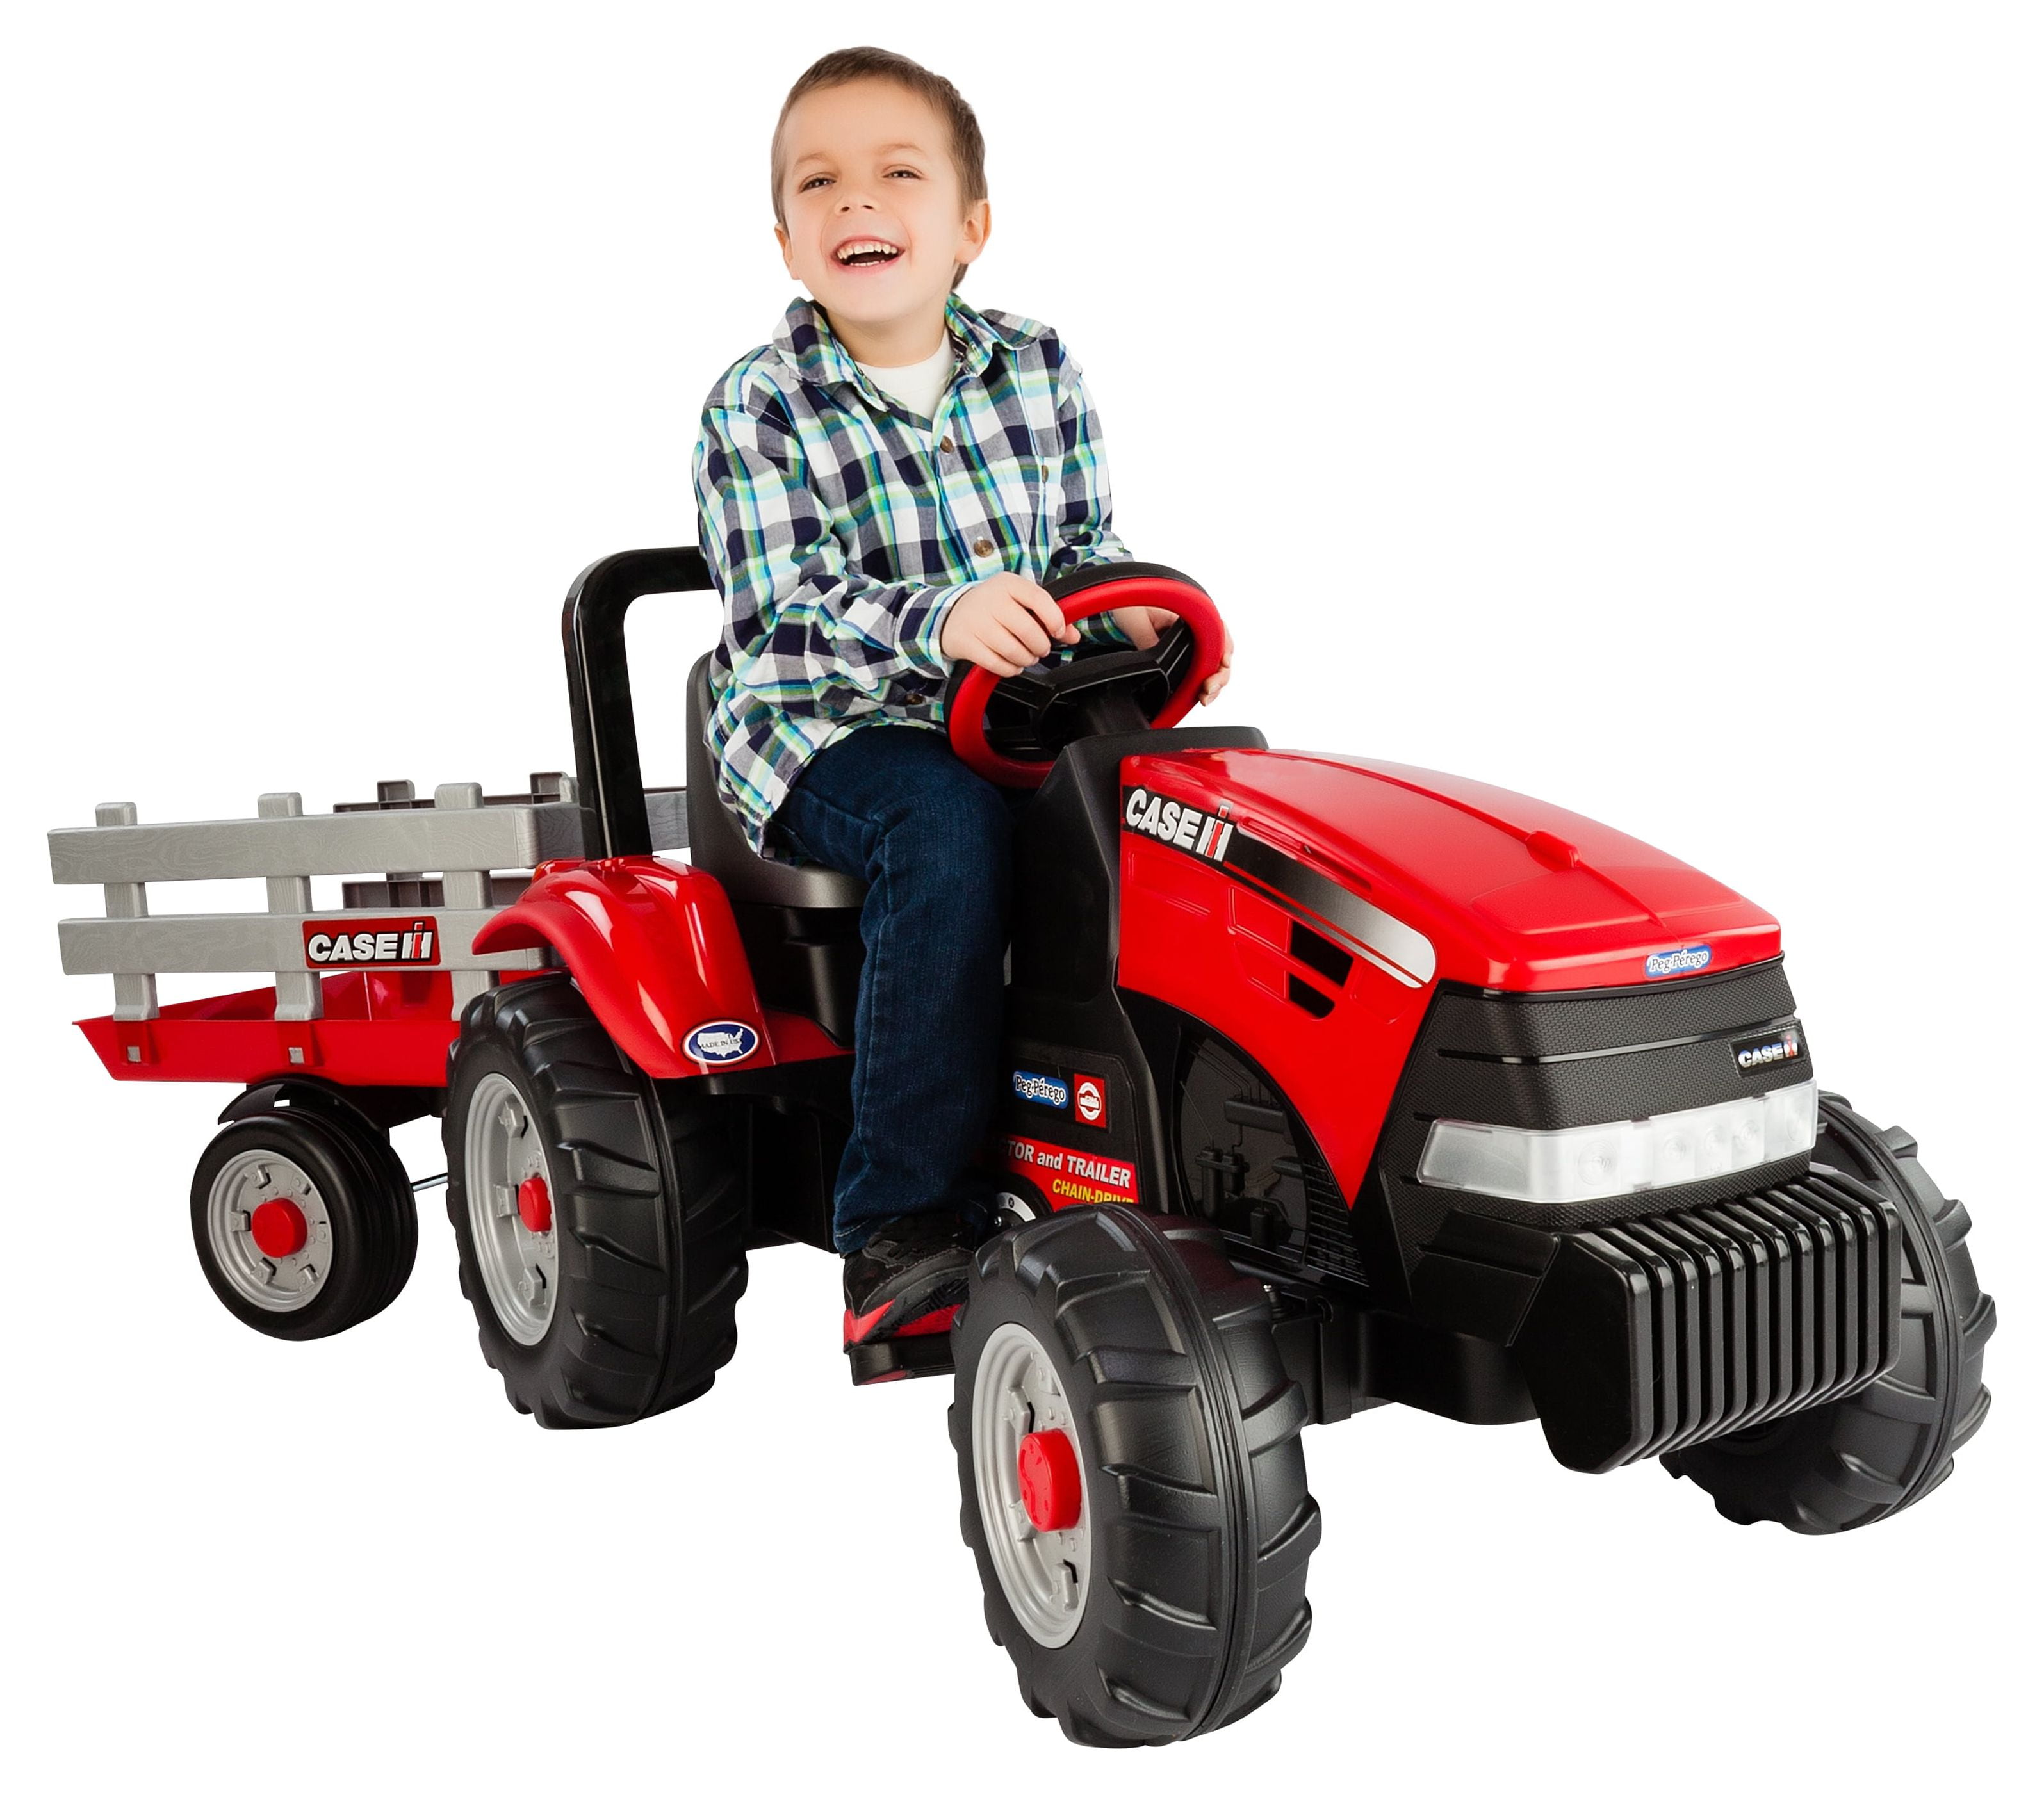 Peg Perego Case Ih Tractor And Trailer